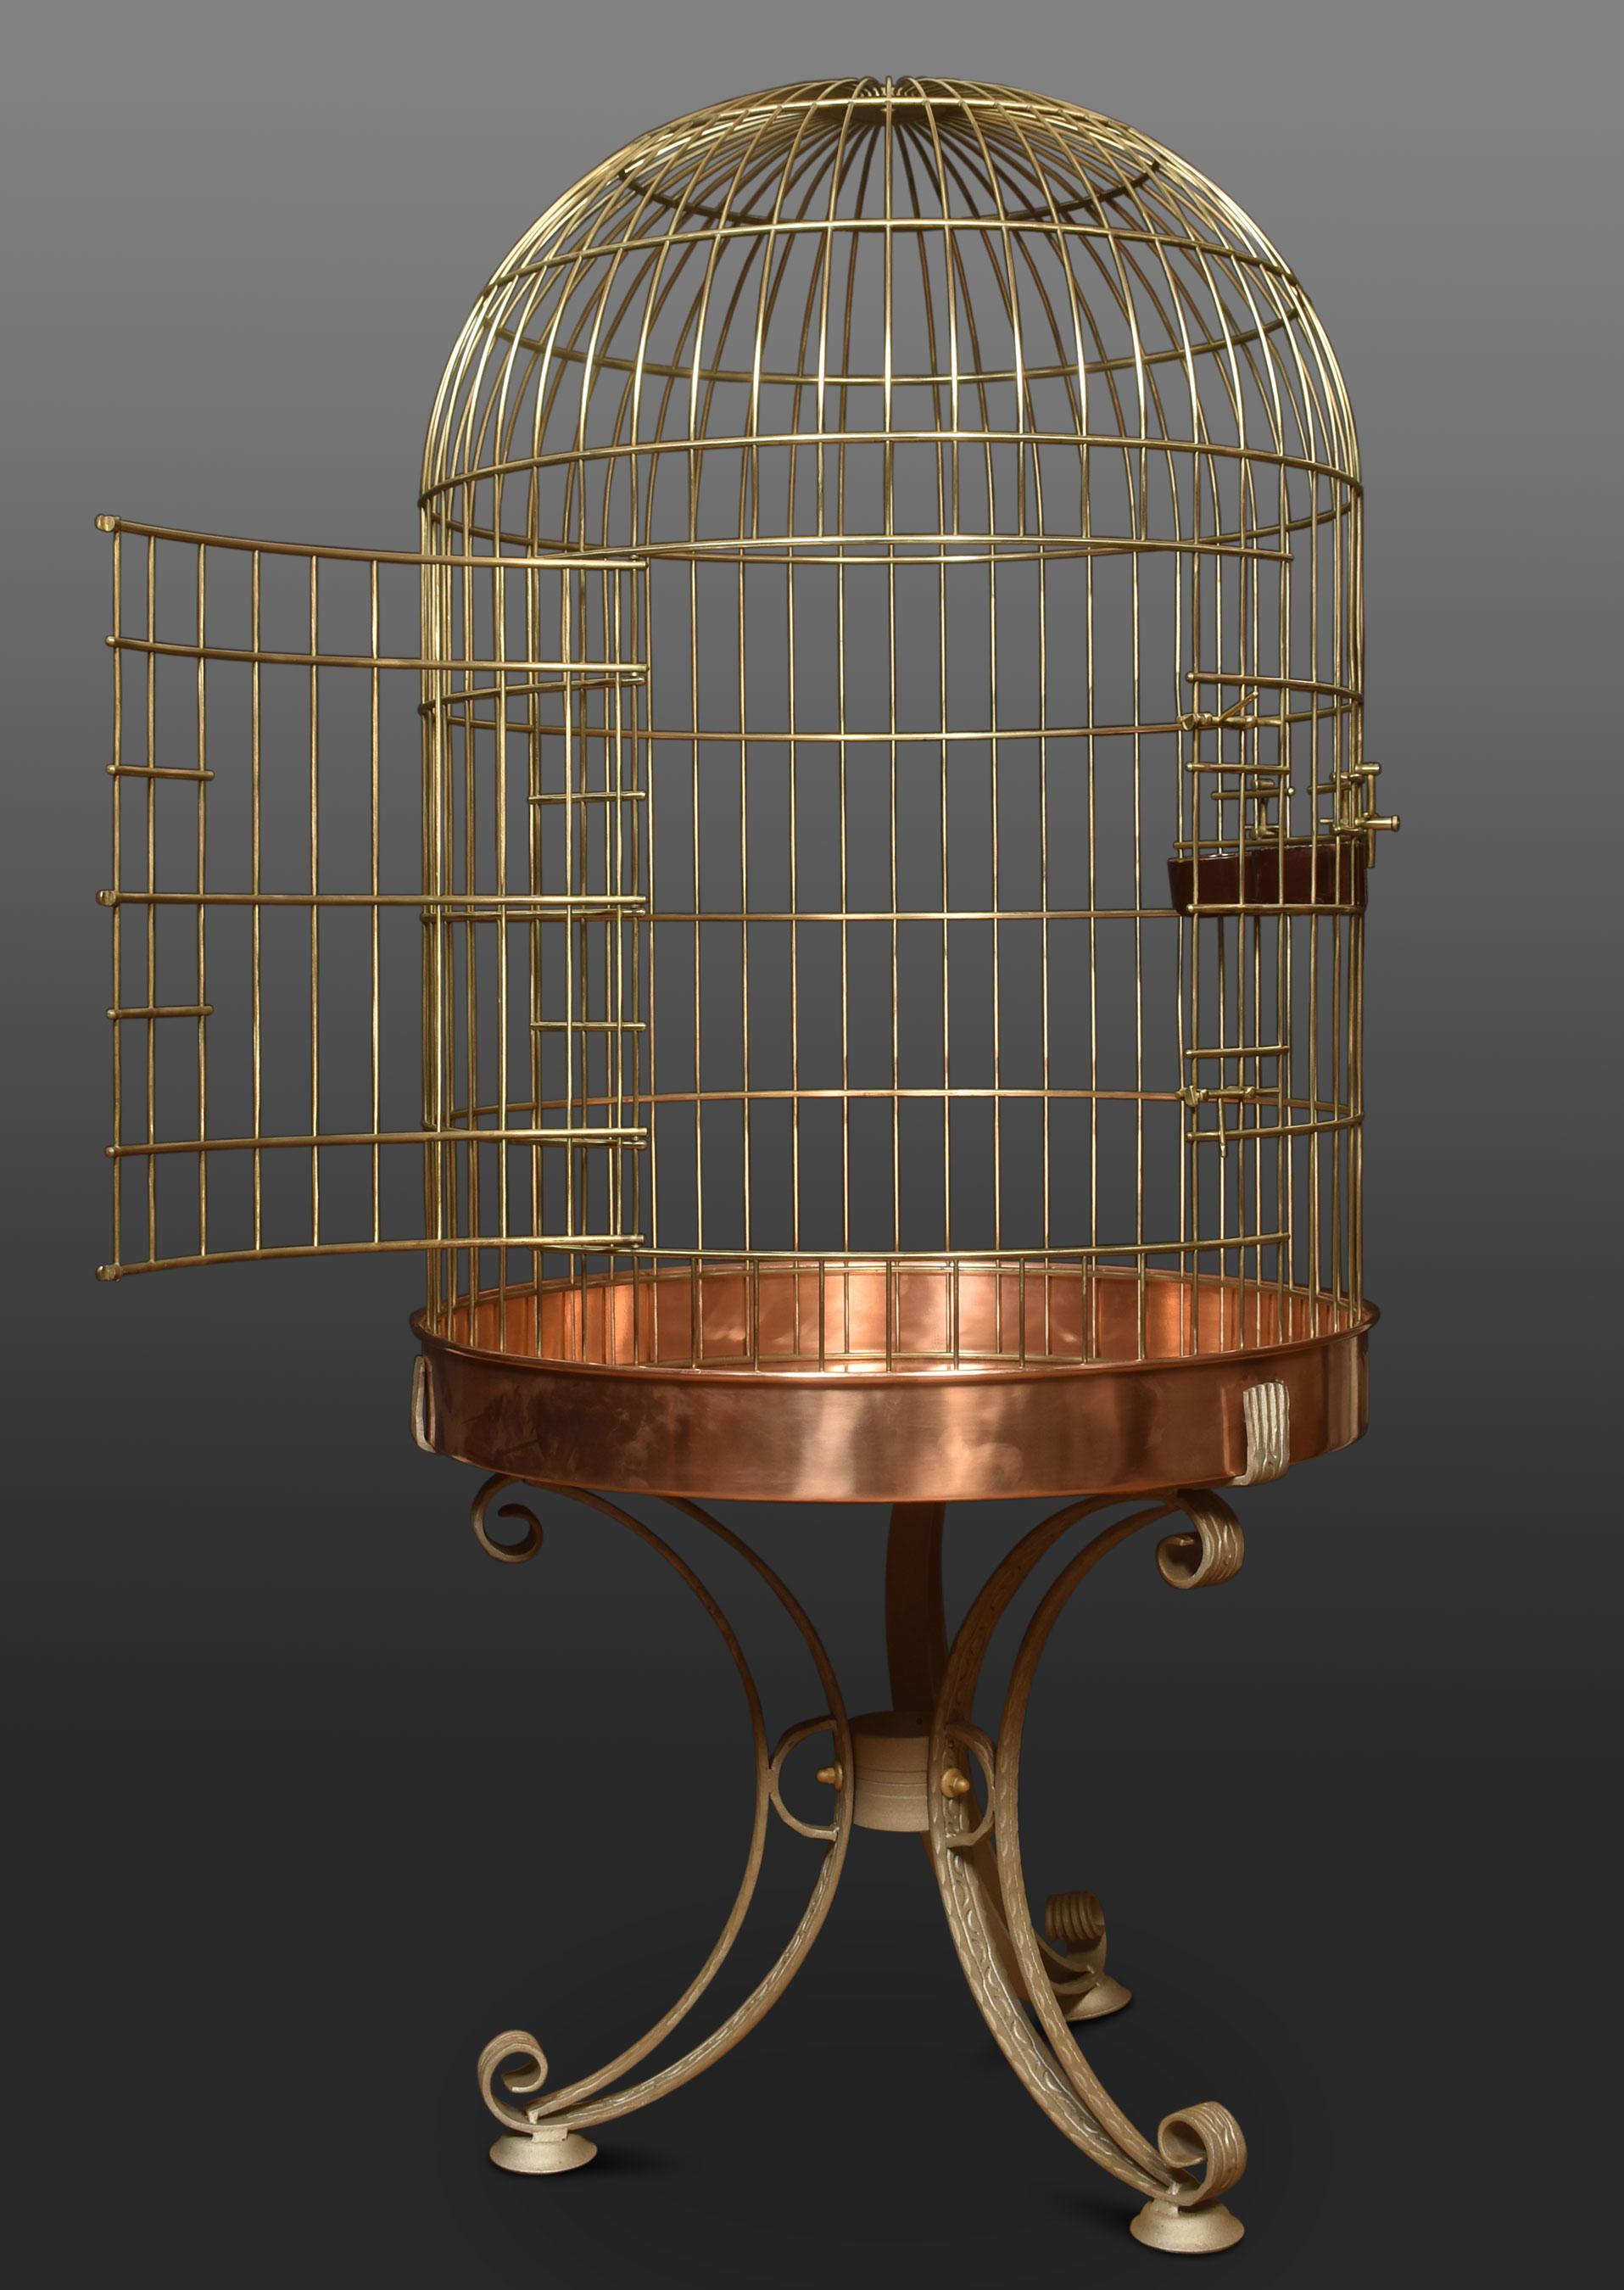 Substantial brass birdcage or aviary, having a dome-shaped cage with copper bottom supported on wrought iron frame.
Dimensions
Height 68 inches
Width 31.5 inches
Depth 31.5 inches.

Cage dimensions
Height 44 inches
Width 31.5 inches
Depth